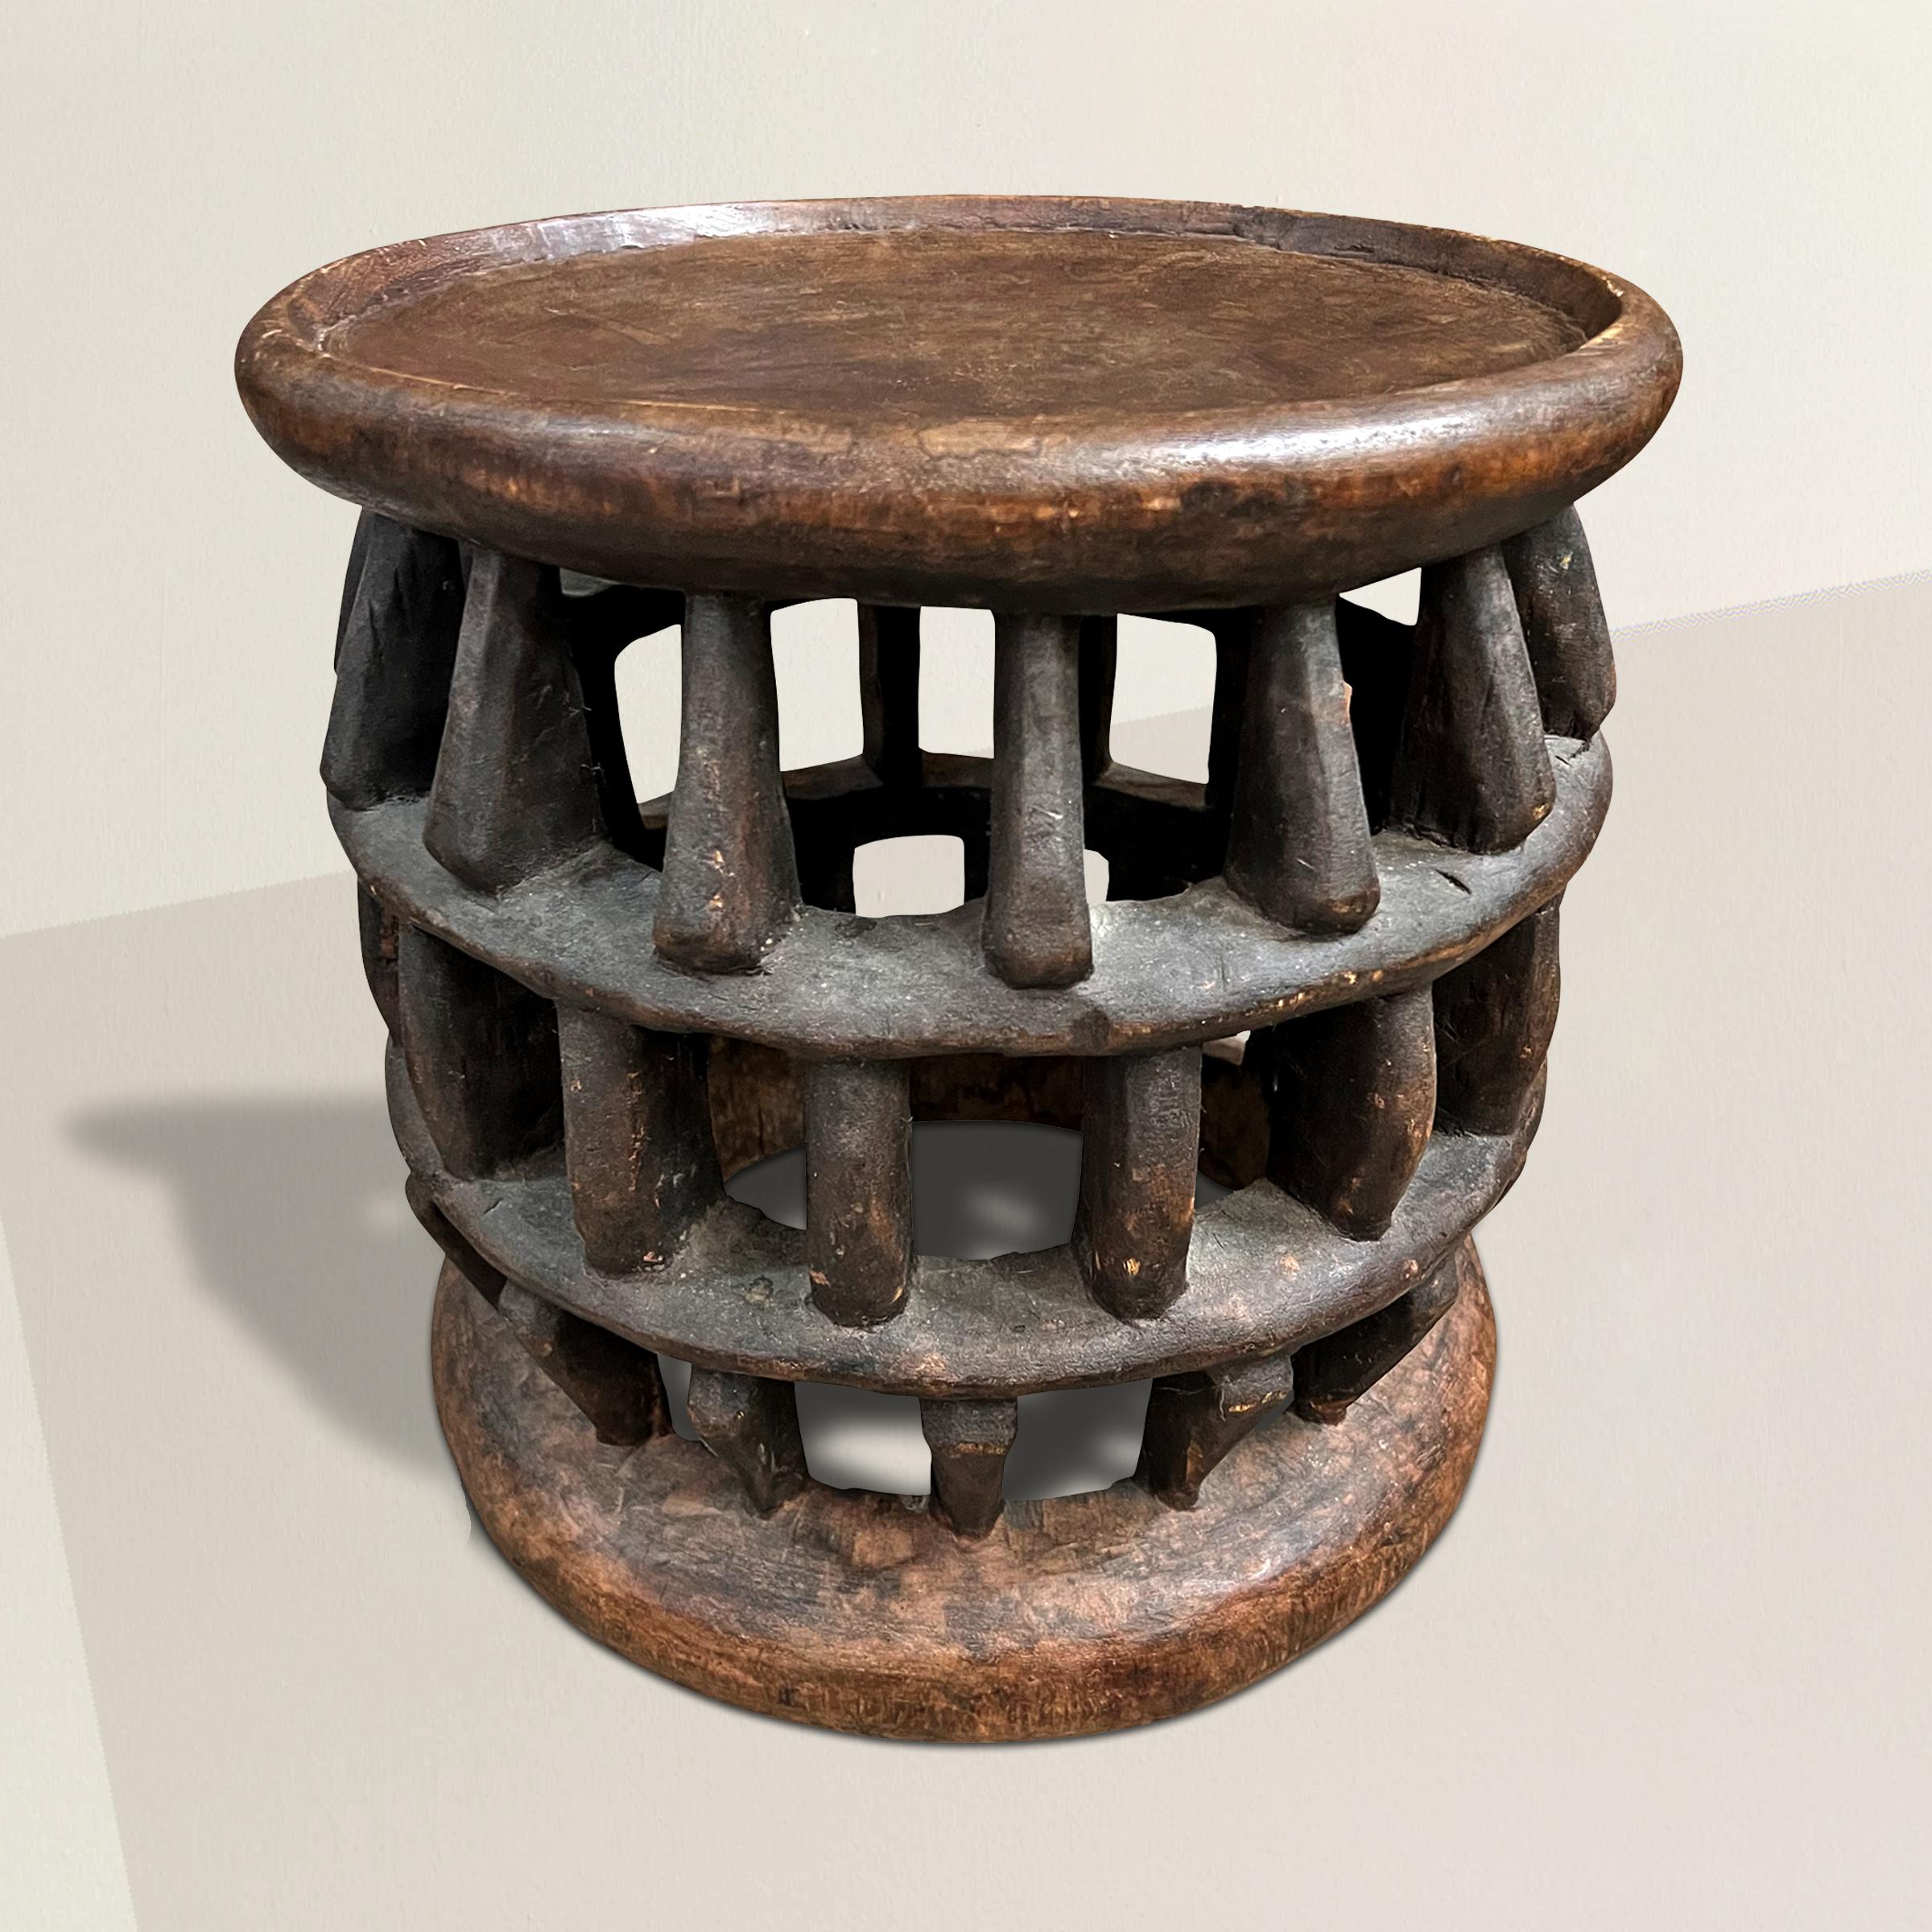 A modern-in-spirit early 20th century Bamum stool carved from one piece of wood with an incredible lattice work pattern supporting a solid top with a large lip. The perfect side table next to your favorite armchair, next to your bed, or tucked under